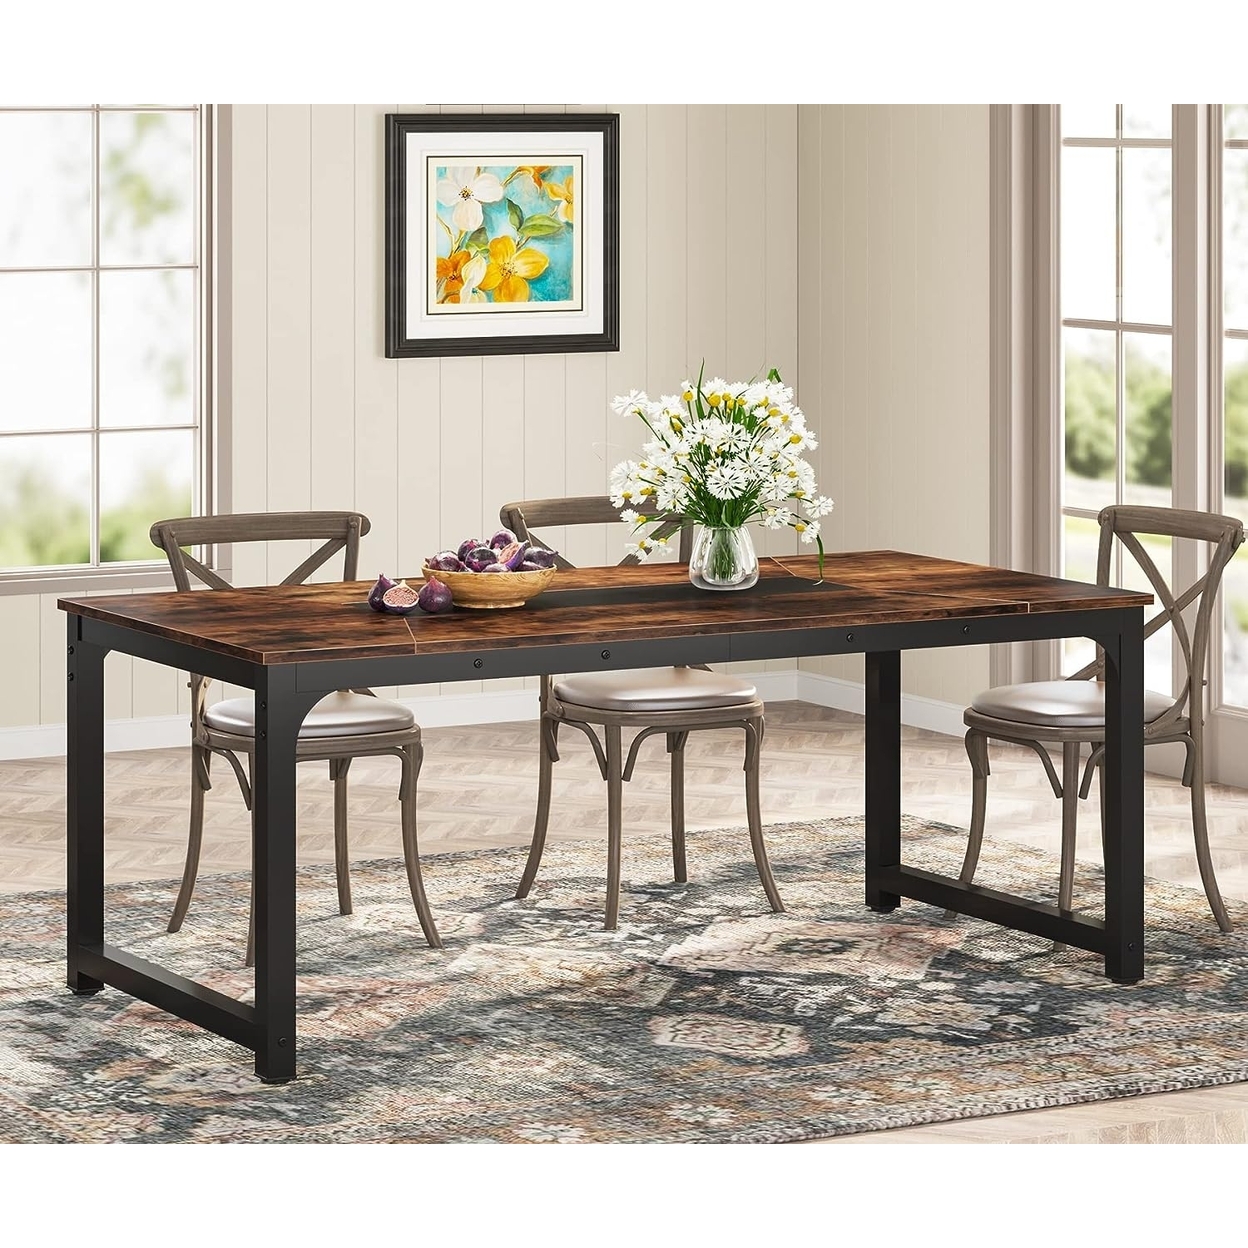 Tribesigns 71x35.4 Dining Table, Industrial Kitchen Table For 6-8 Person